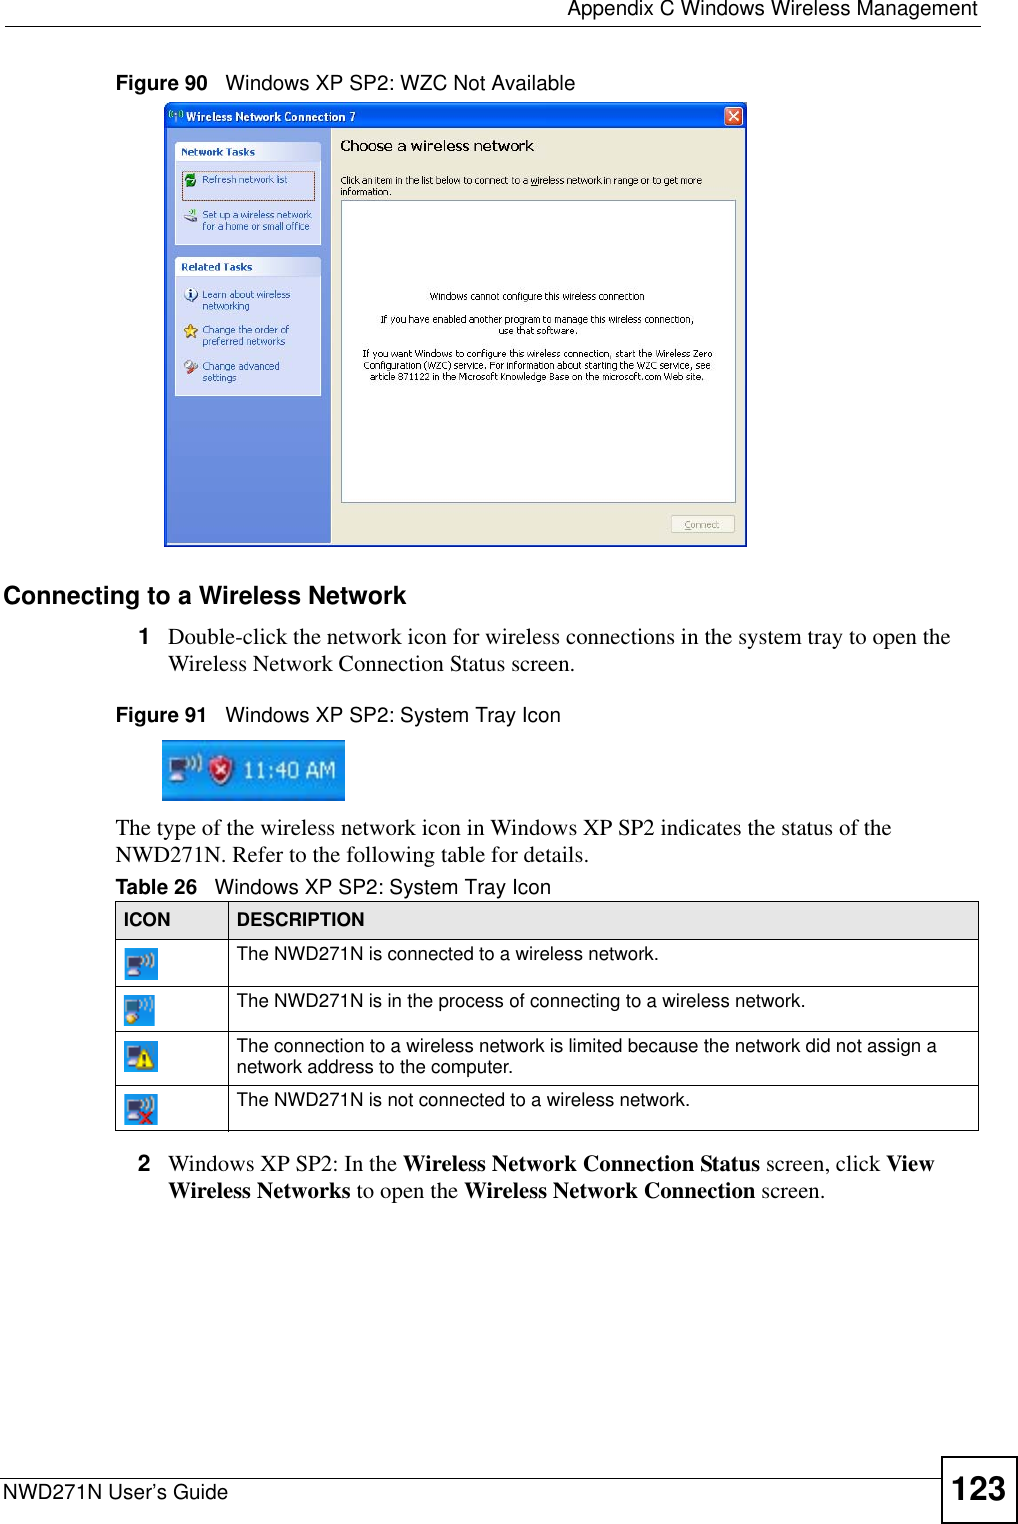  Appendix C Windows Wireless ManagementNWD271N User’s Guide 123Figure 90   Windows XP SP2: WZC Not AvailableConnecting to a Wireless Network 1Double-click the network icon for wireless connections in the system tray to open the Wireless Network Connection Status screen.Figure 91   Windows XP SP2: System Tray IconThe type of the wireless network icon in Windows XP SP2 indicates the status of the NWD271N. Refer to the following table for details.2Windows XP SP2: In the Wireless Network Connection Status screen, click View Wireless Networks to open the Wireless Network Connection screen.Table 26   Windows XP SP2: System Tray IconICON DESCRIPTIONThe NWD271N is connected to a wireless network.The NWD271N is in the process of connecting to a wireless network.The connection to a wireless network is limited because the network did not assign a network address to the computer.The NWD271N is not connected to a wireless network.